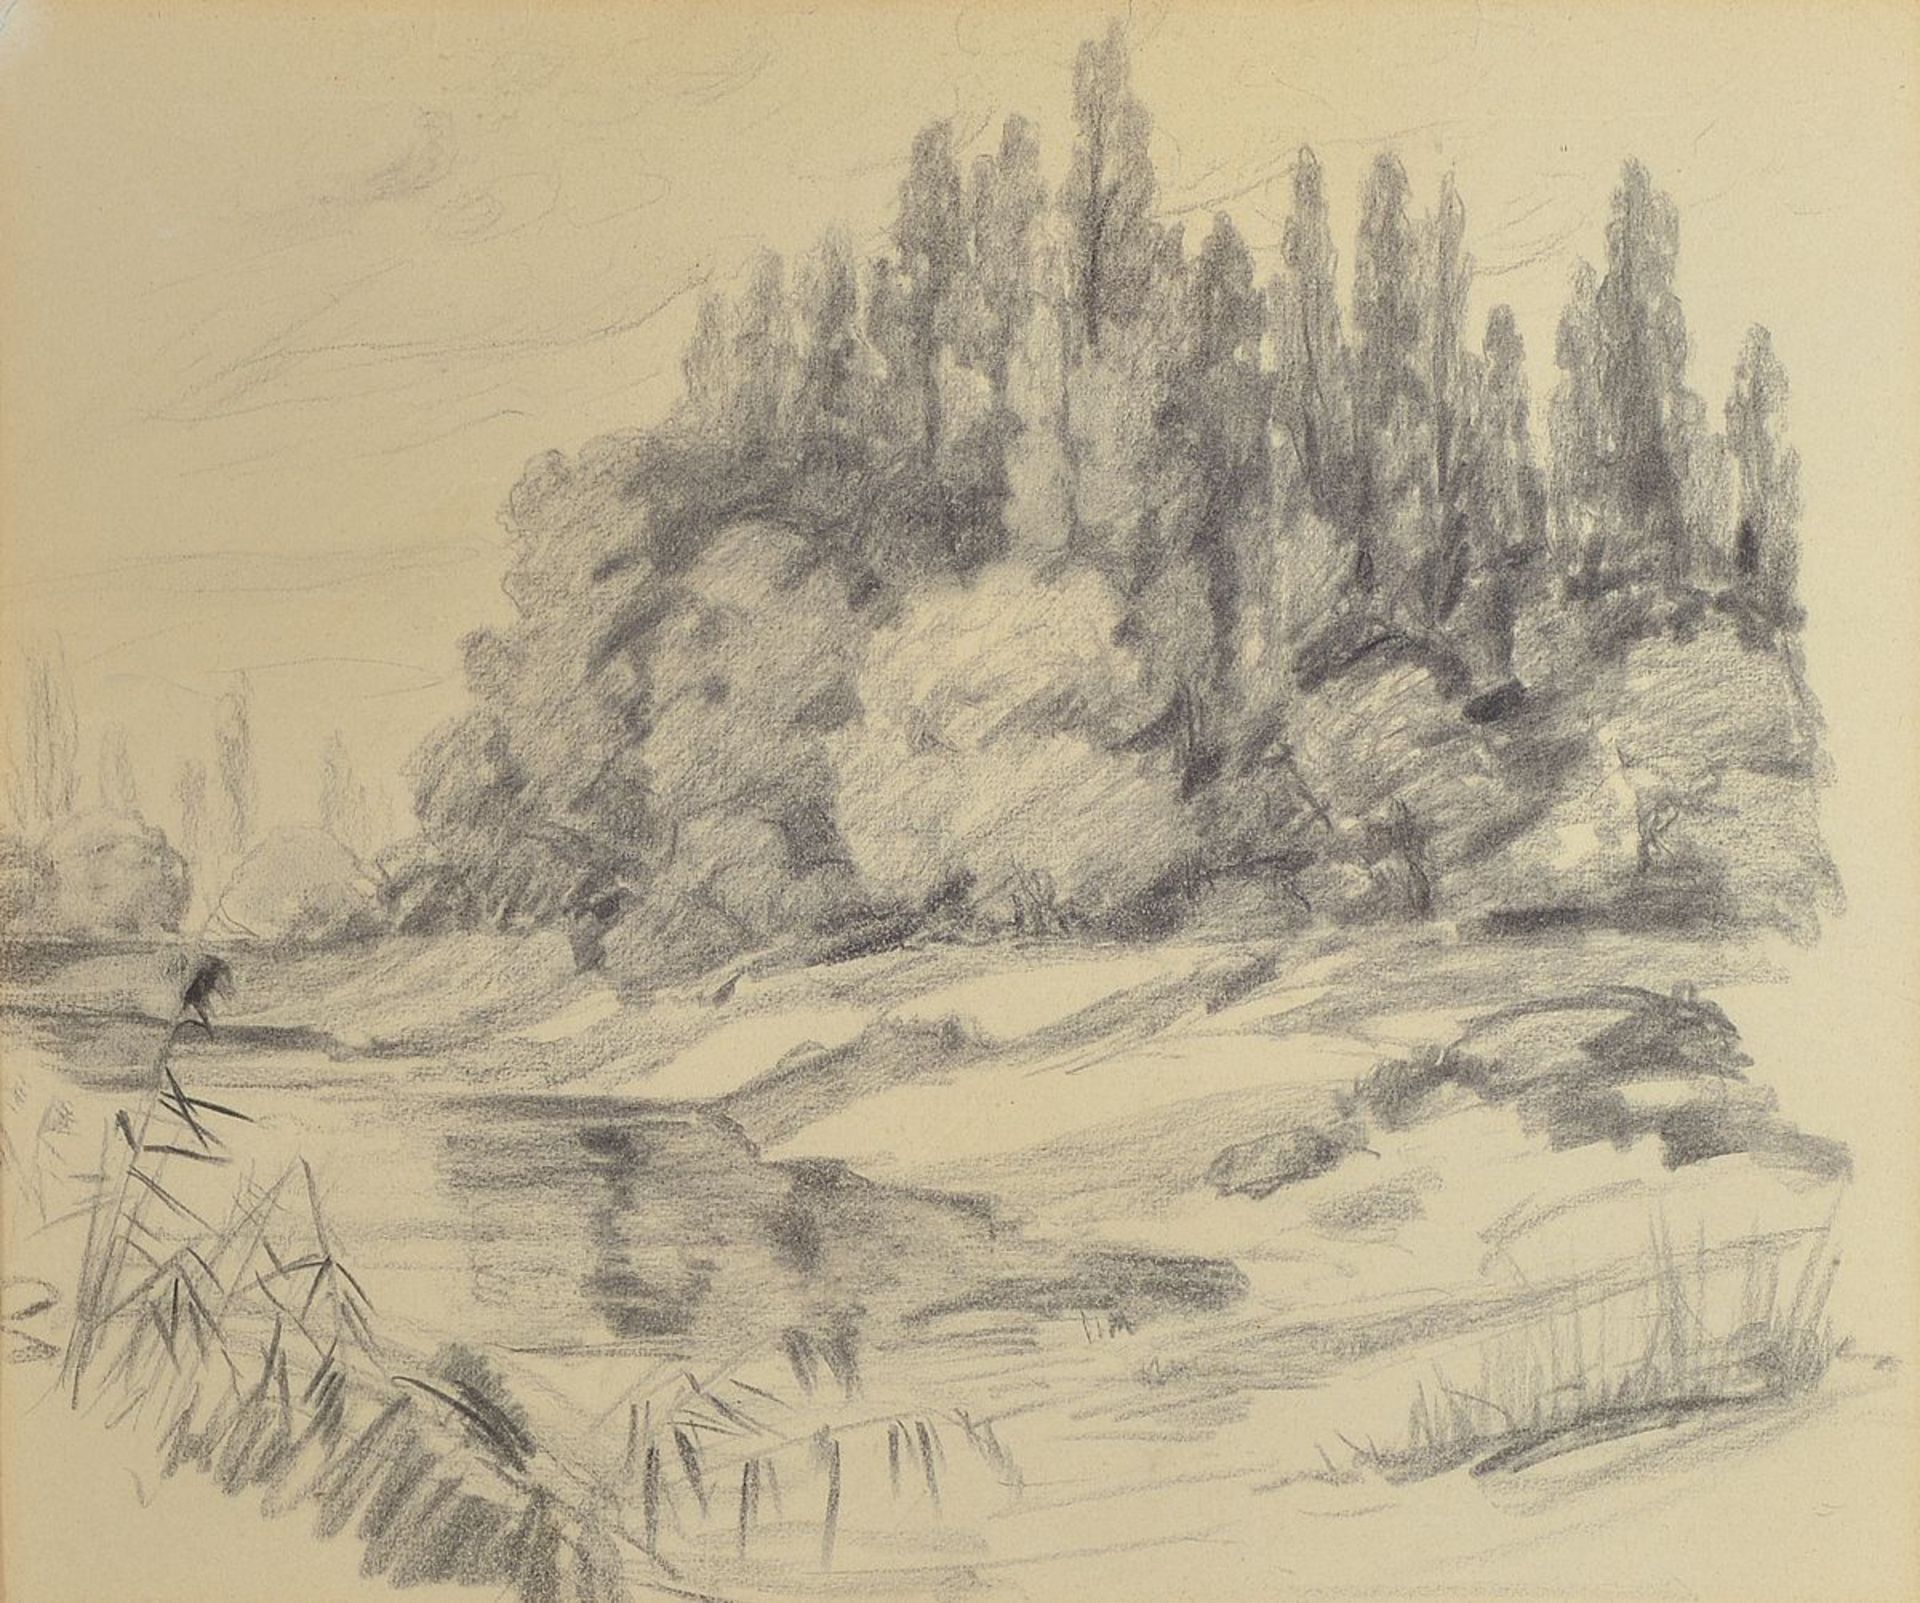 Attribution: Karl Graf, 1902-1986 Speyer, at the edge of the forest, pencil drawing on paper,